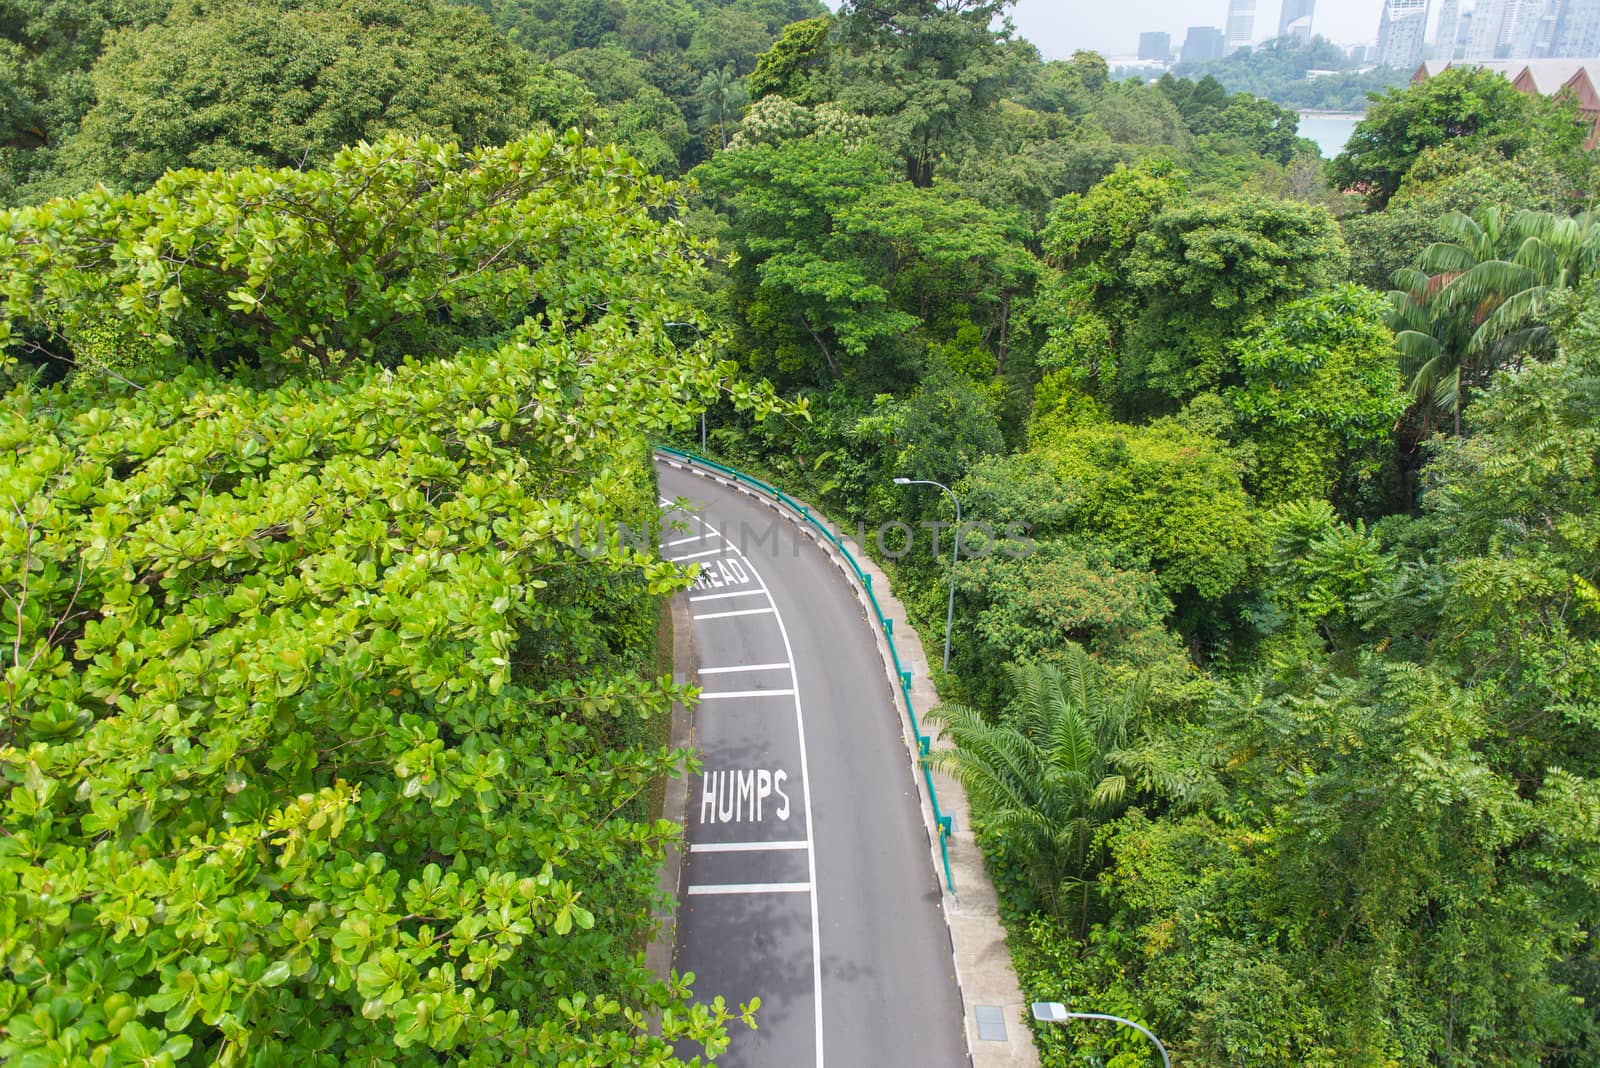 top view of curving road with trees in a public park.